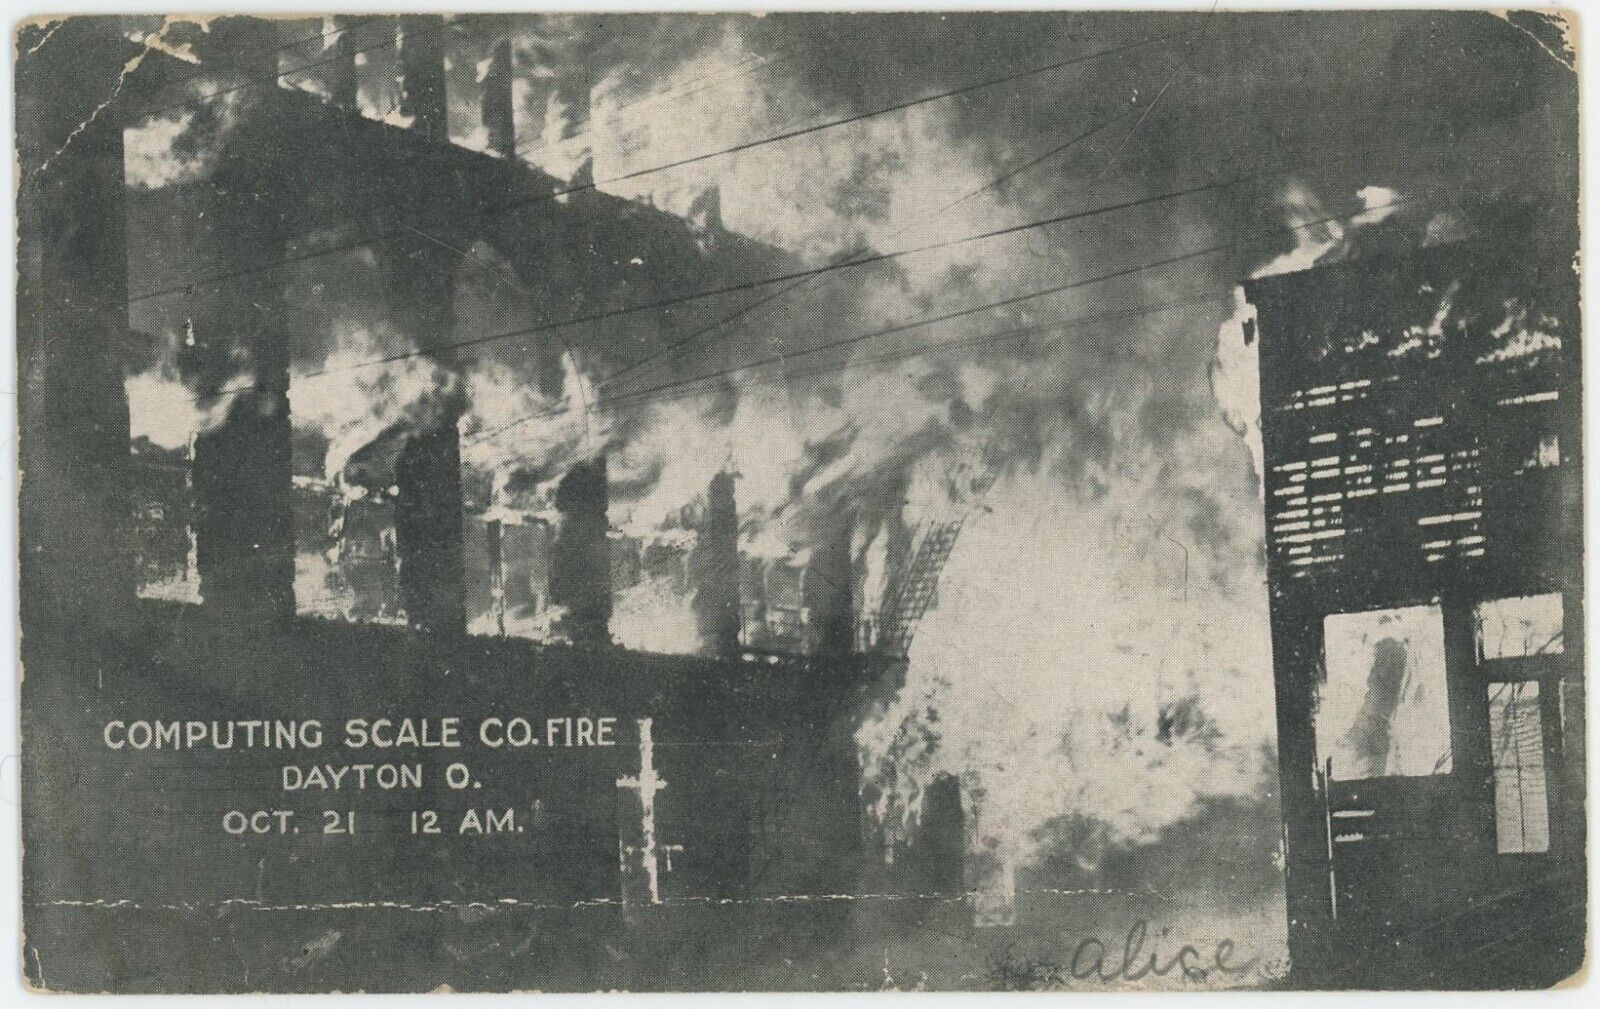 Antique 1909 Postcard - Dayton OH Ohio\'s Greatest Fire - Computing Scale Co.